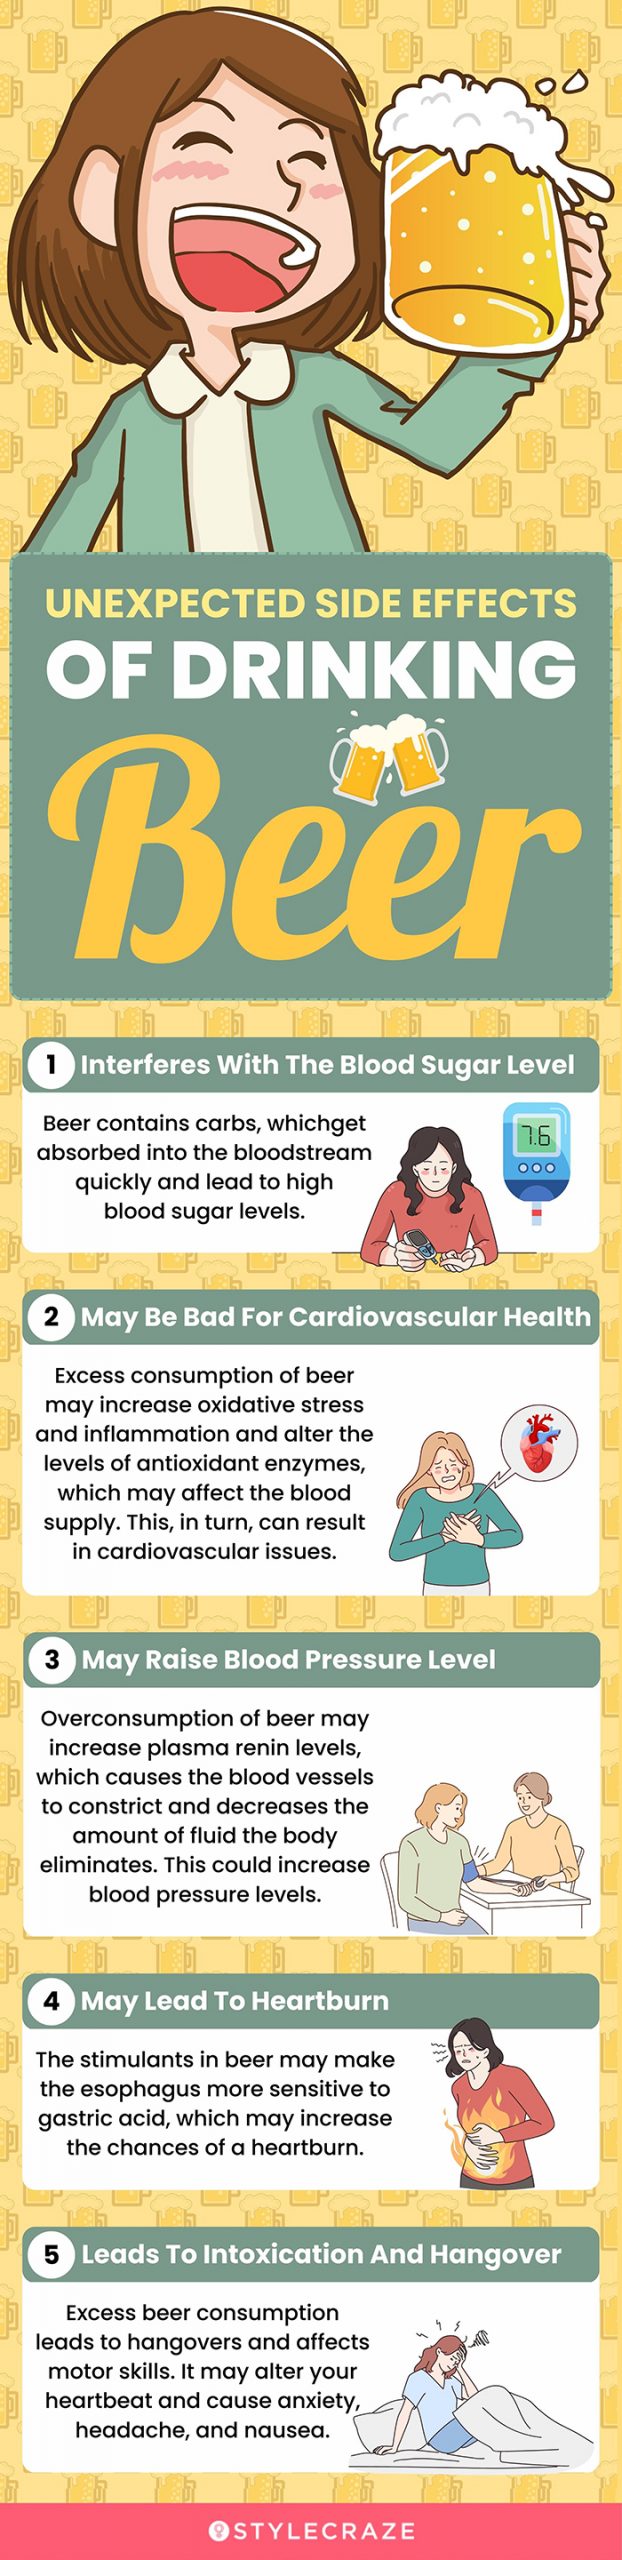 unexpected side effects of drinking beer (infographic)